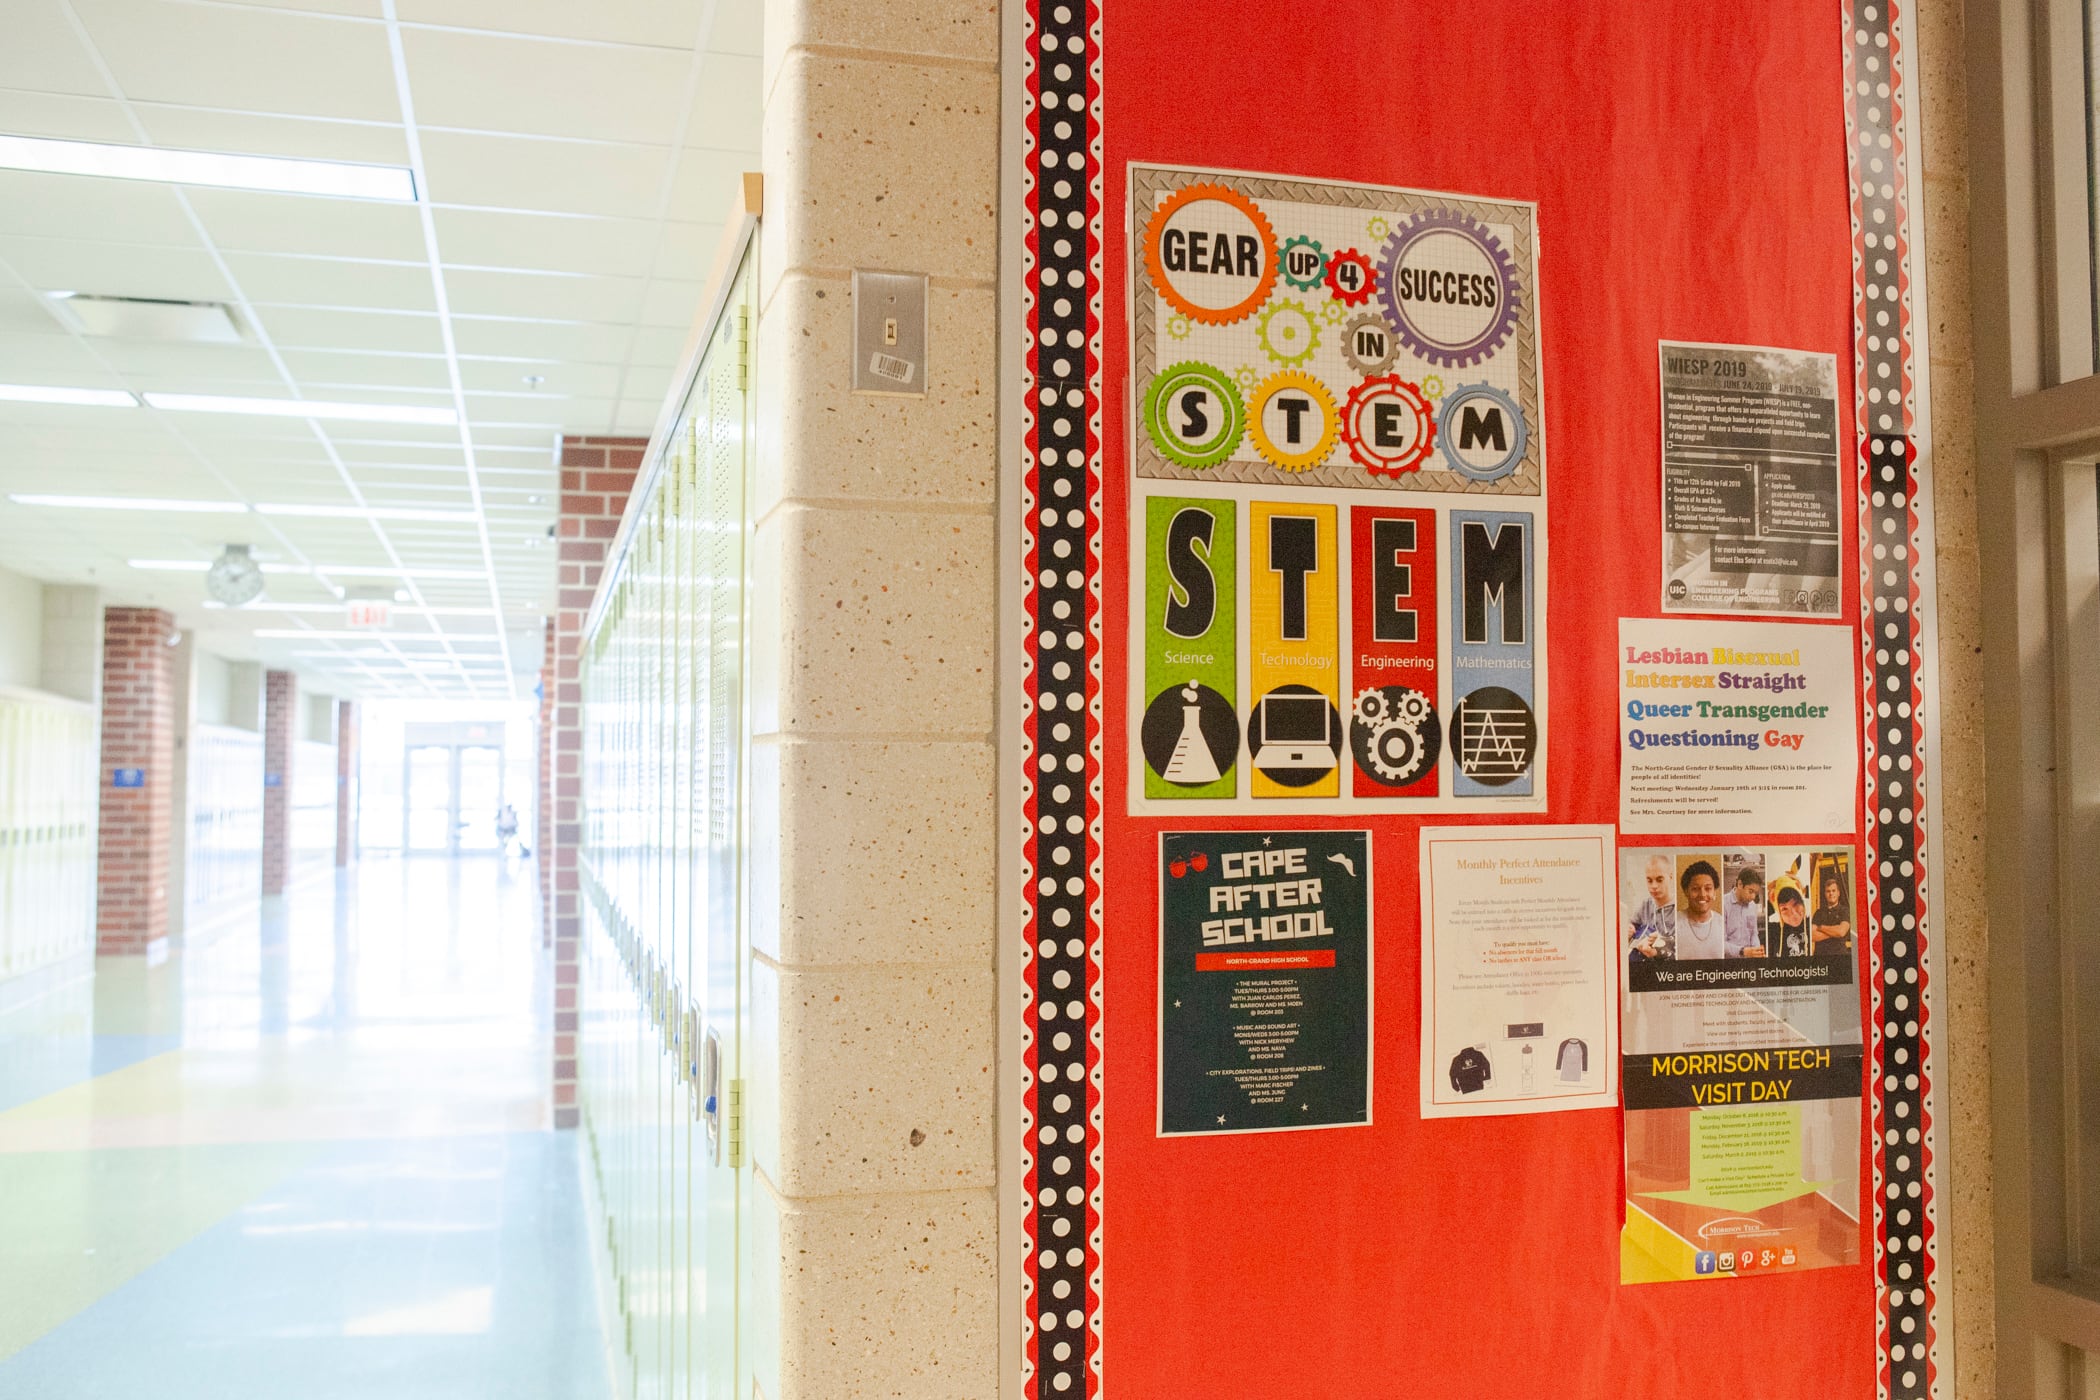 STEM posters hang on a wall in May 2019 at North-Grand High School in Chicago.